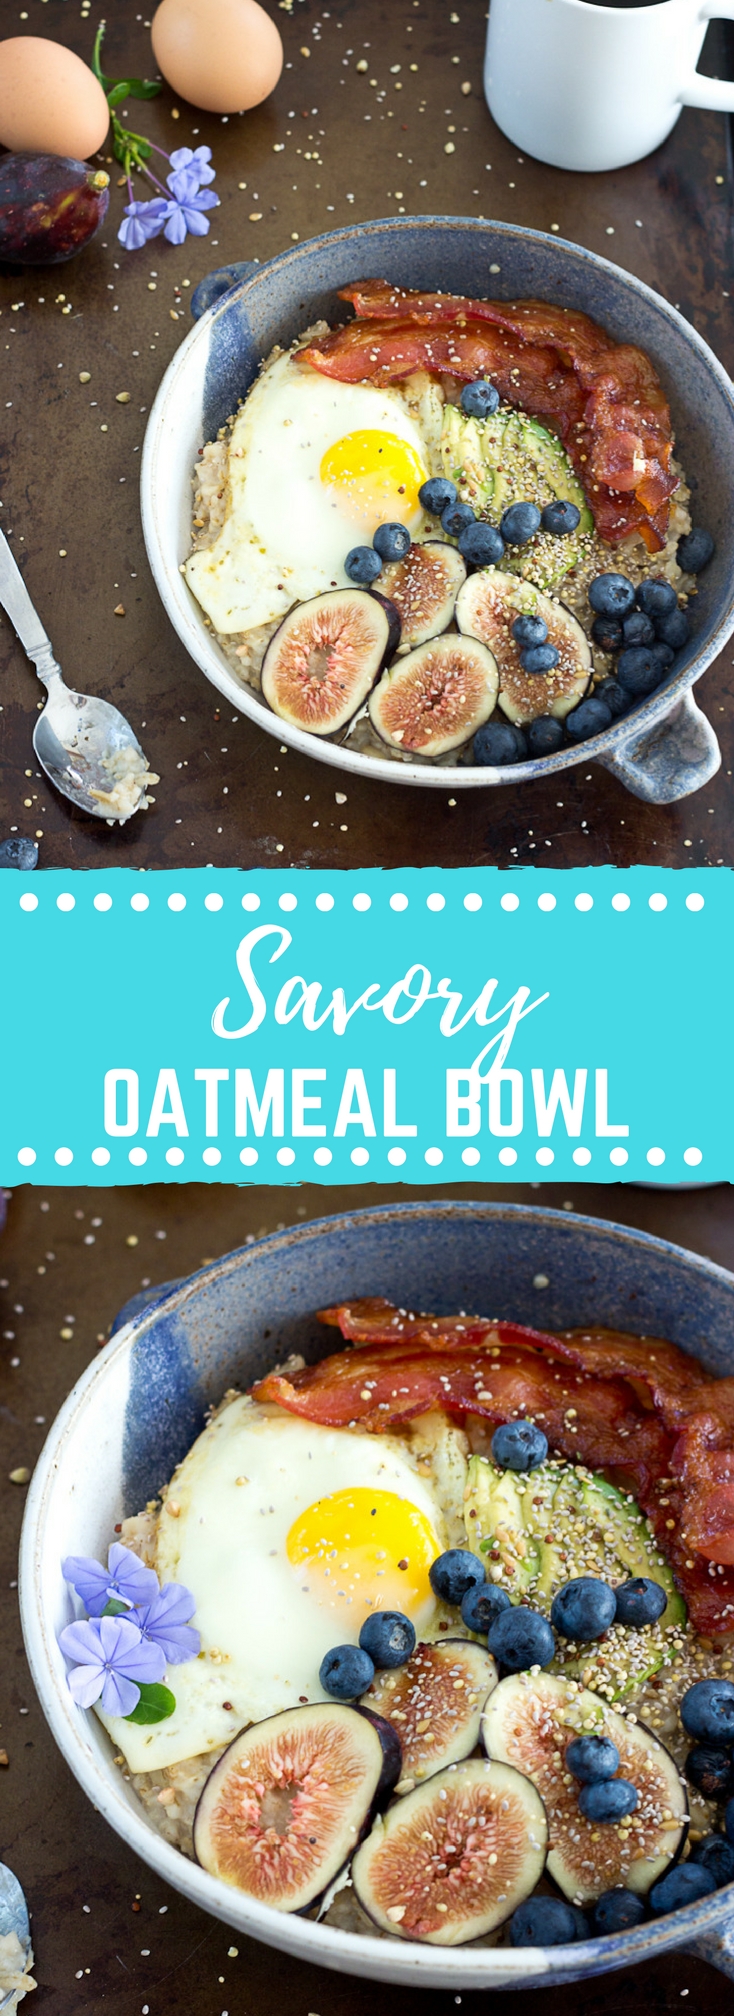 It's time to shake up that sweet oatmeal bowl and make it savory with bacon, eggs, and avocado! This Savory Oatmeal Bowl is high protein and will keep you energized all morning long. 